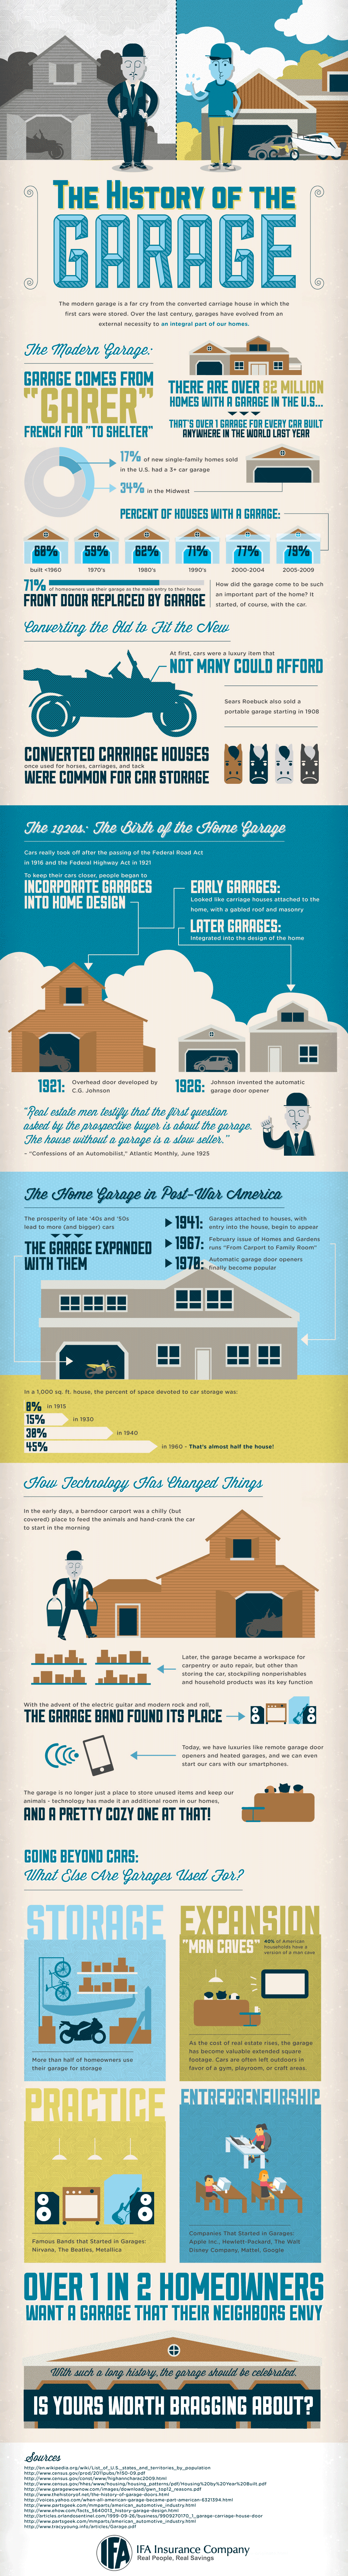 The History of the Garage Infographic